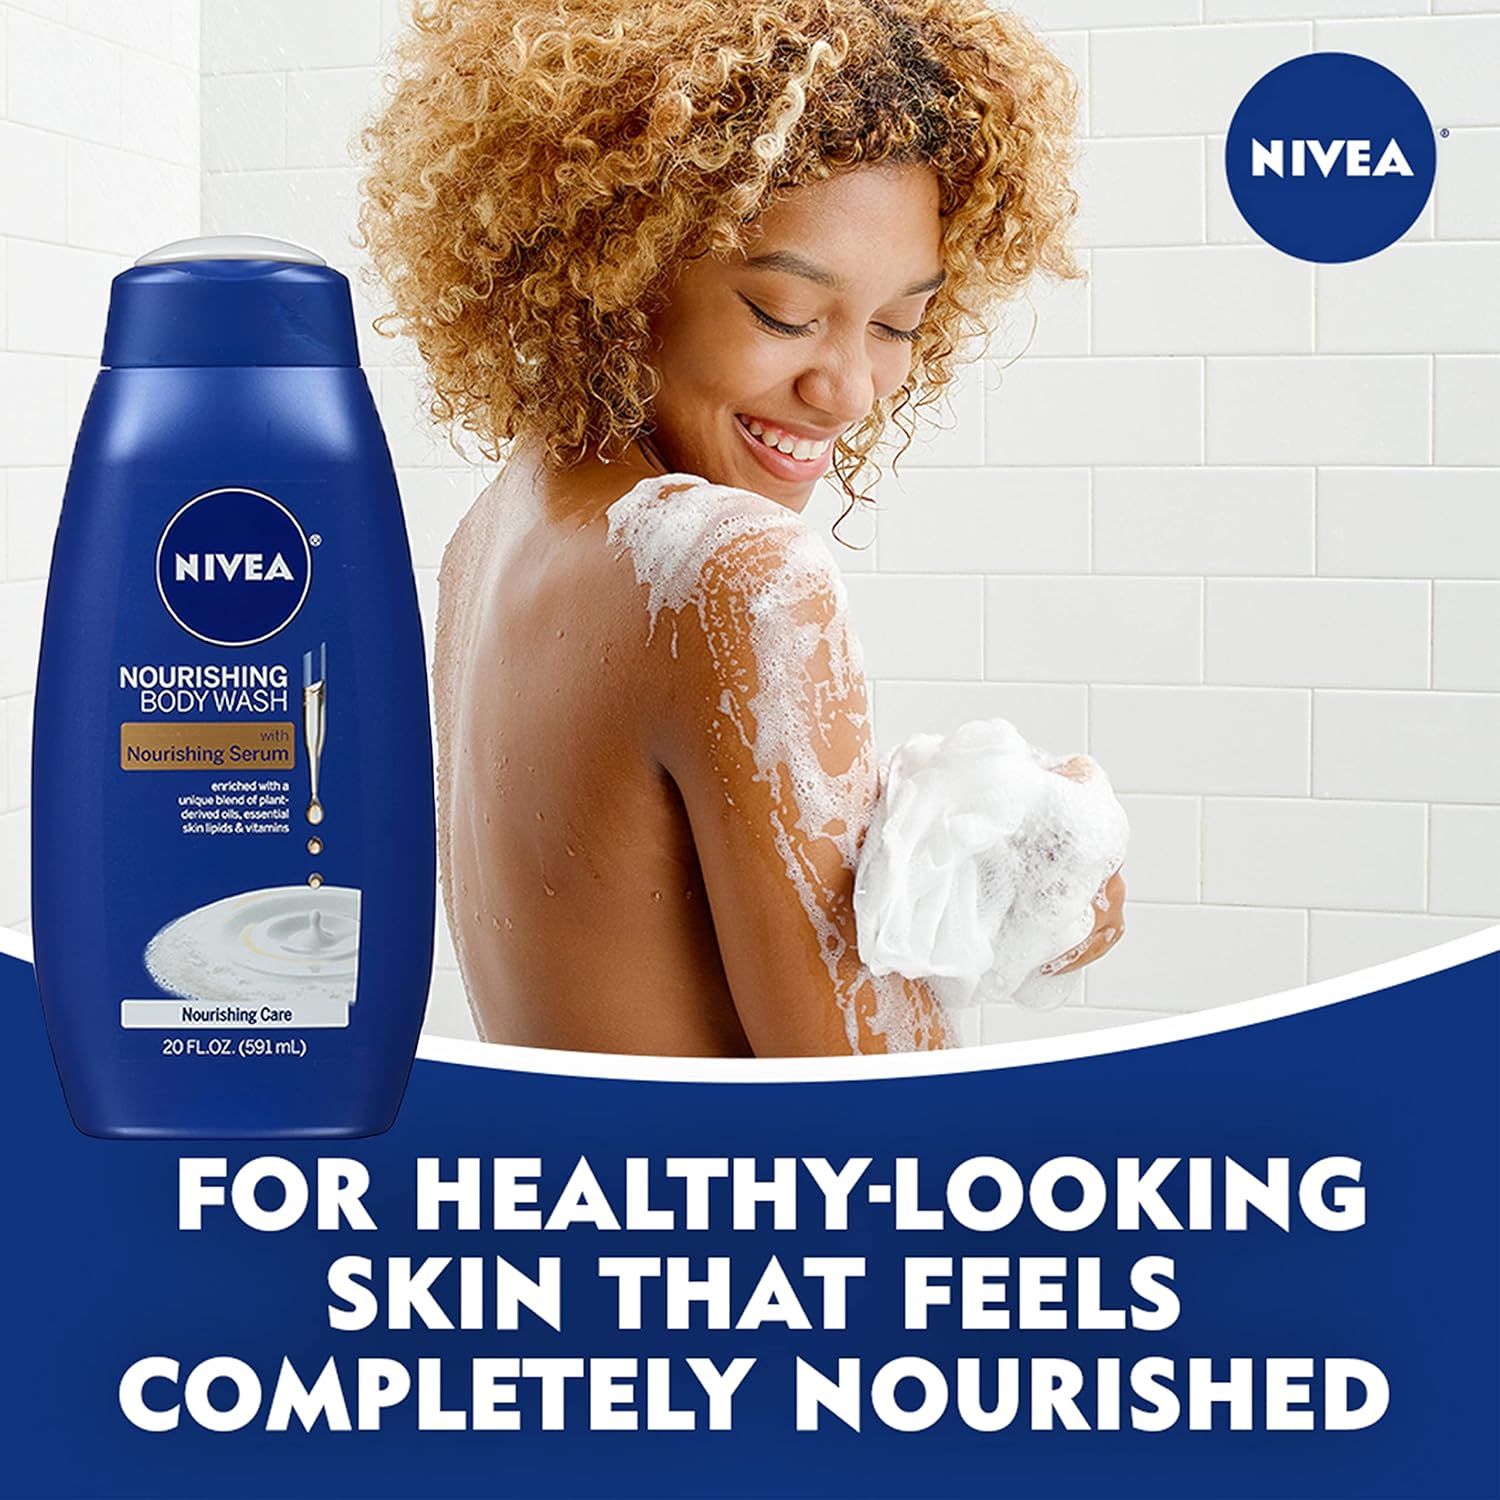 NIVEA Skin Care Set For Her, Nourishing Body Wash, Moisturizing Body Lotion, Lip Balm Stick with Shea Butter, & Multi Purpose Face, Body & Foot Cream, 4 Piece Gift Set (Pack of 6) : Beauty & Personal Care